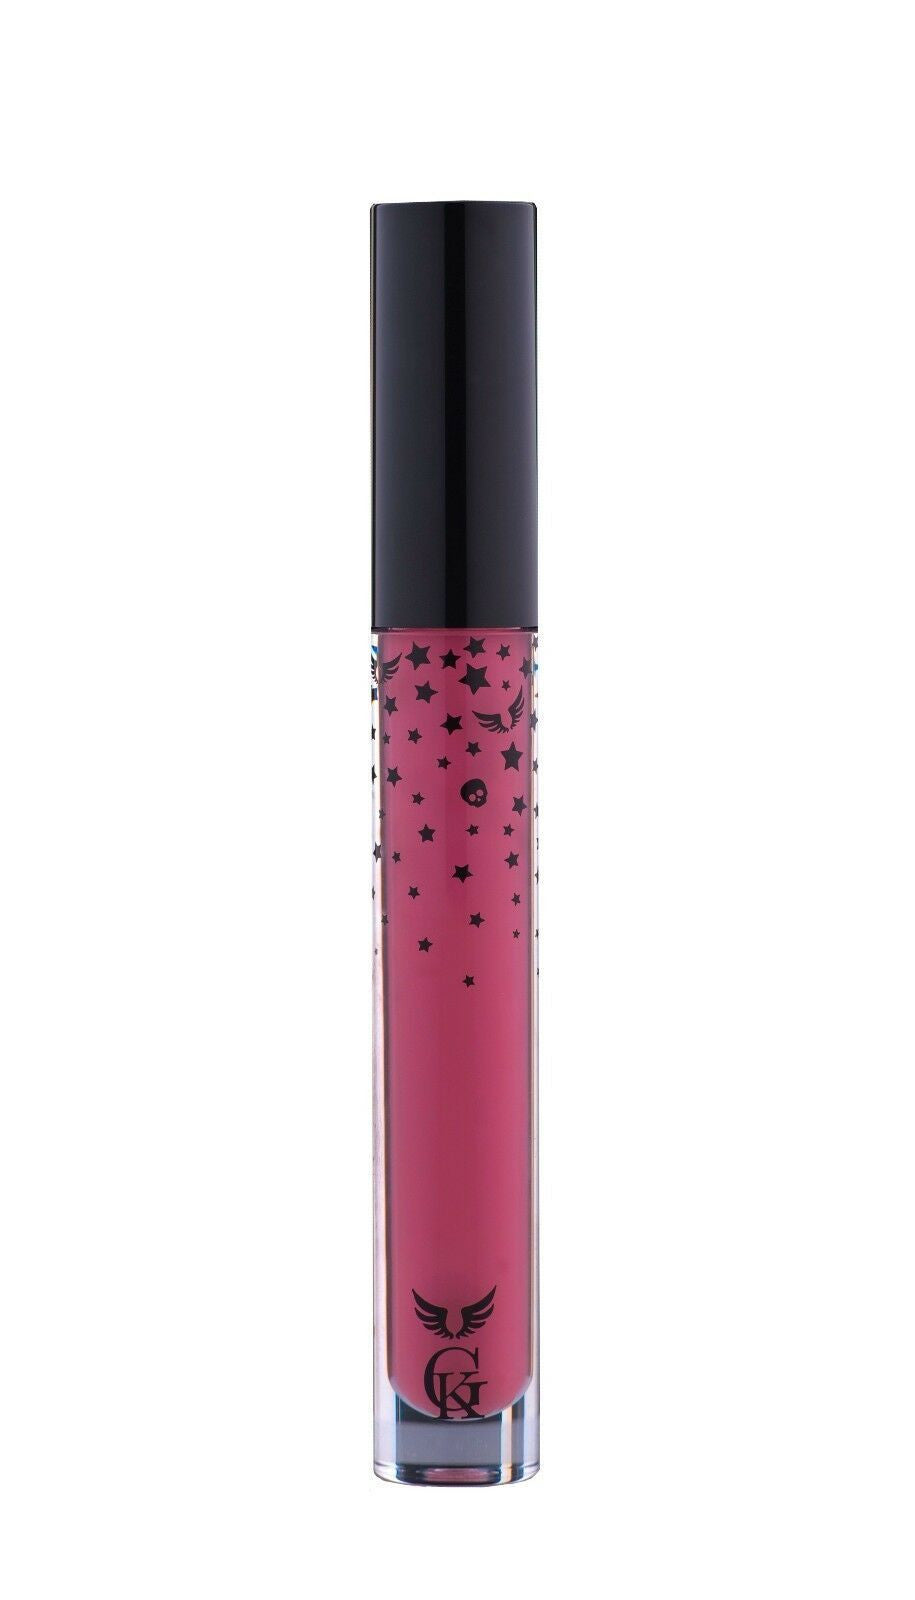 iaahhaircare,Showtime - Matte - Liquid LipStick and Lip Definer x Garbo & Kelly,Lipstick,Garbo & Kelly